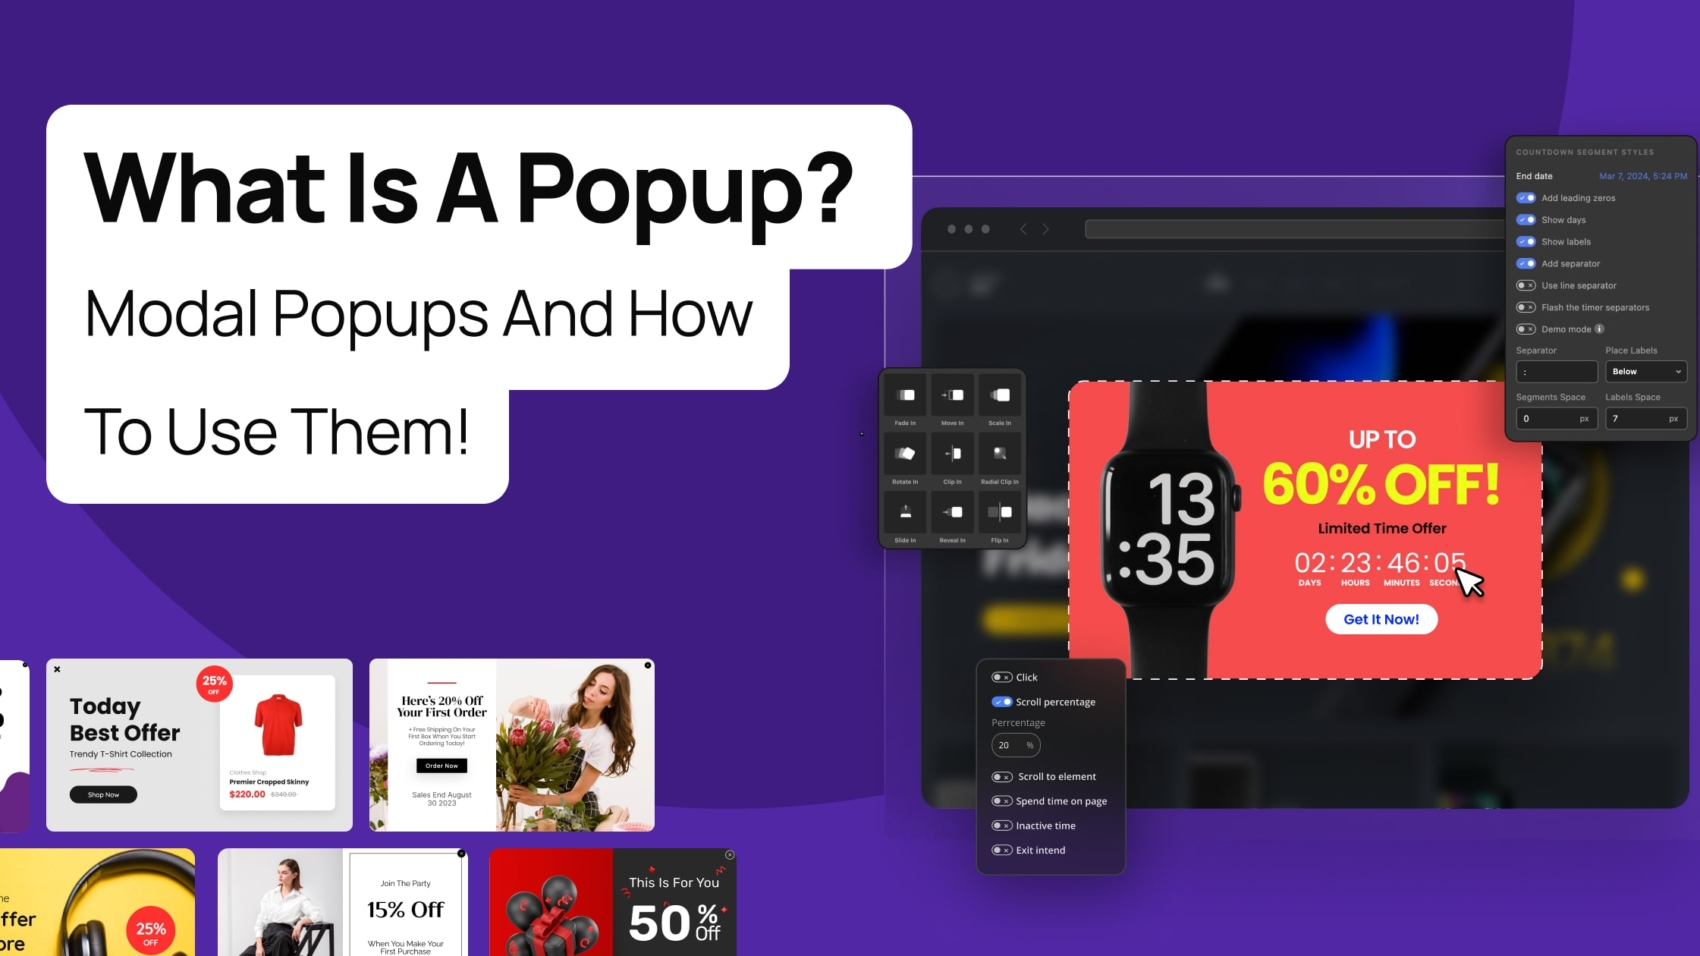 What Is A Popup?: Modal Popups And How To Use Them!